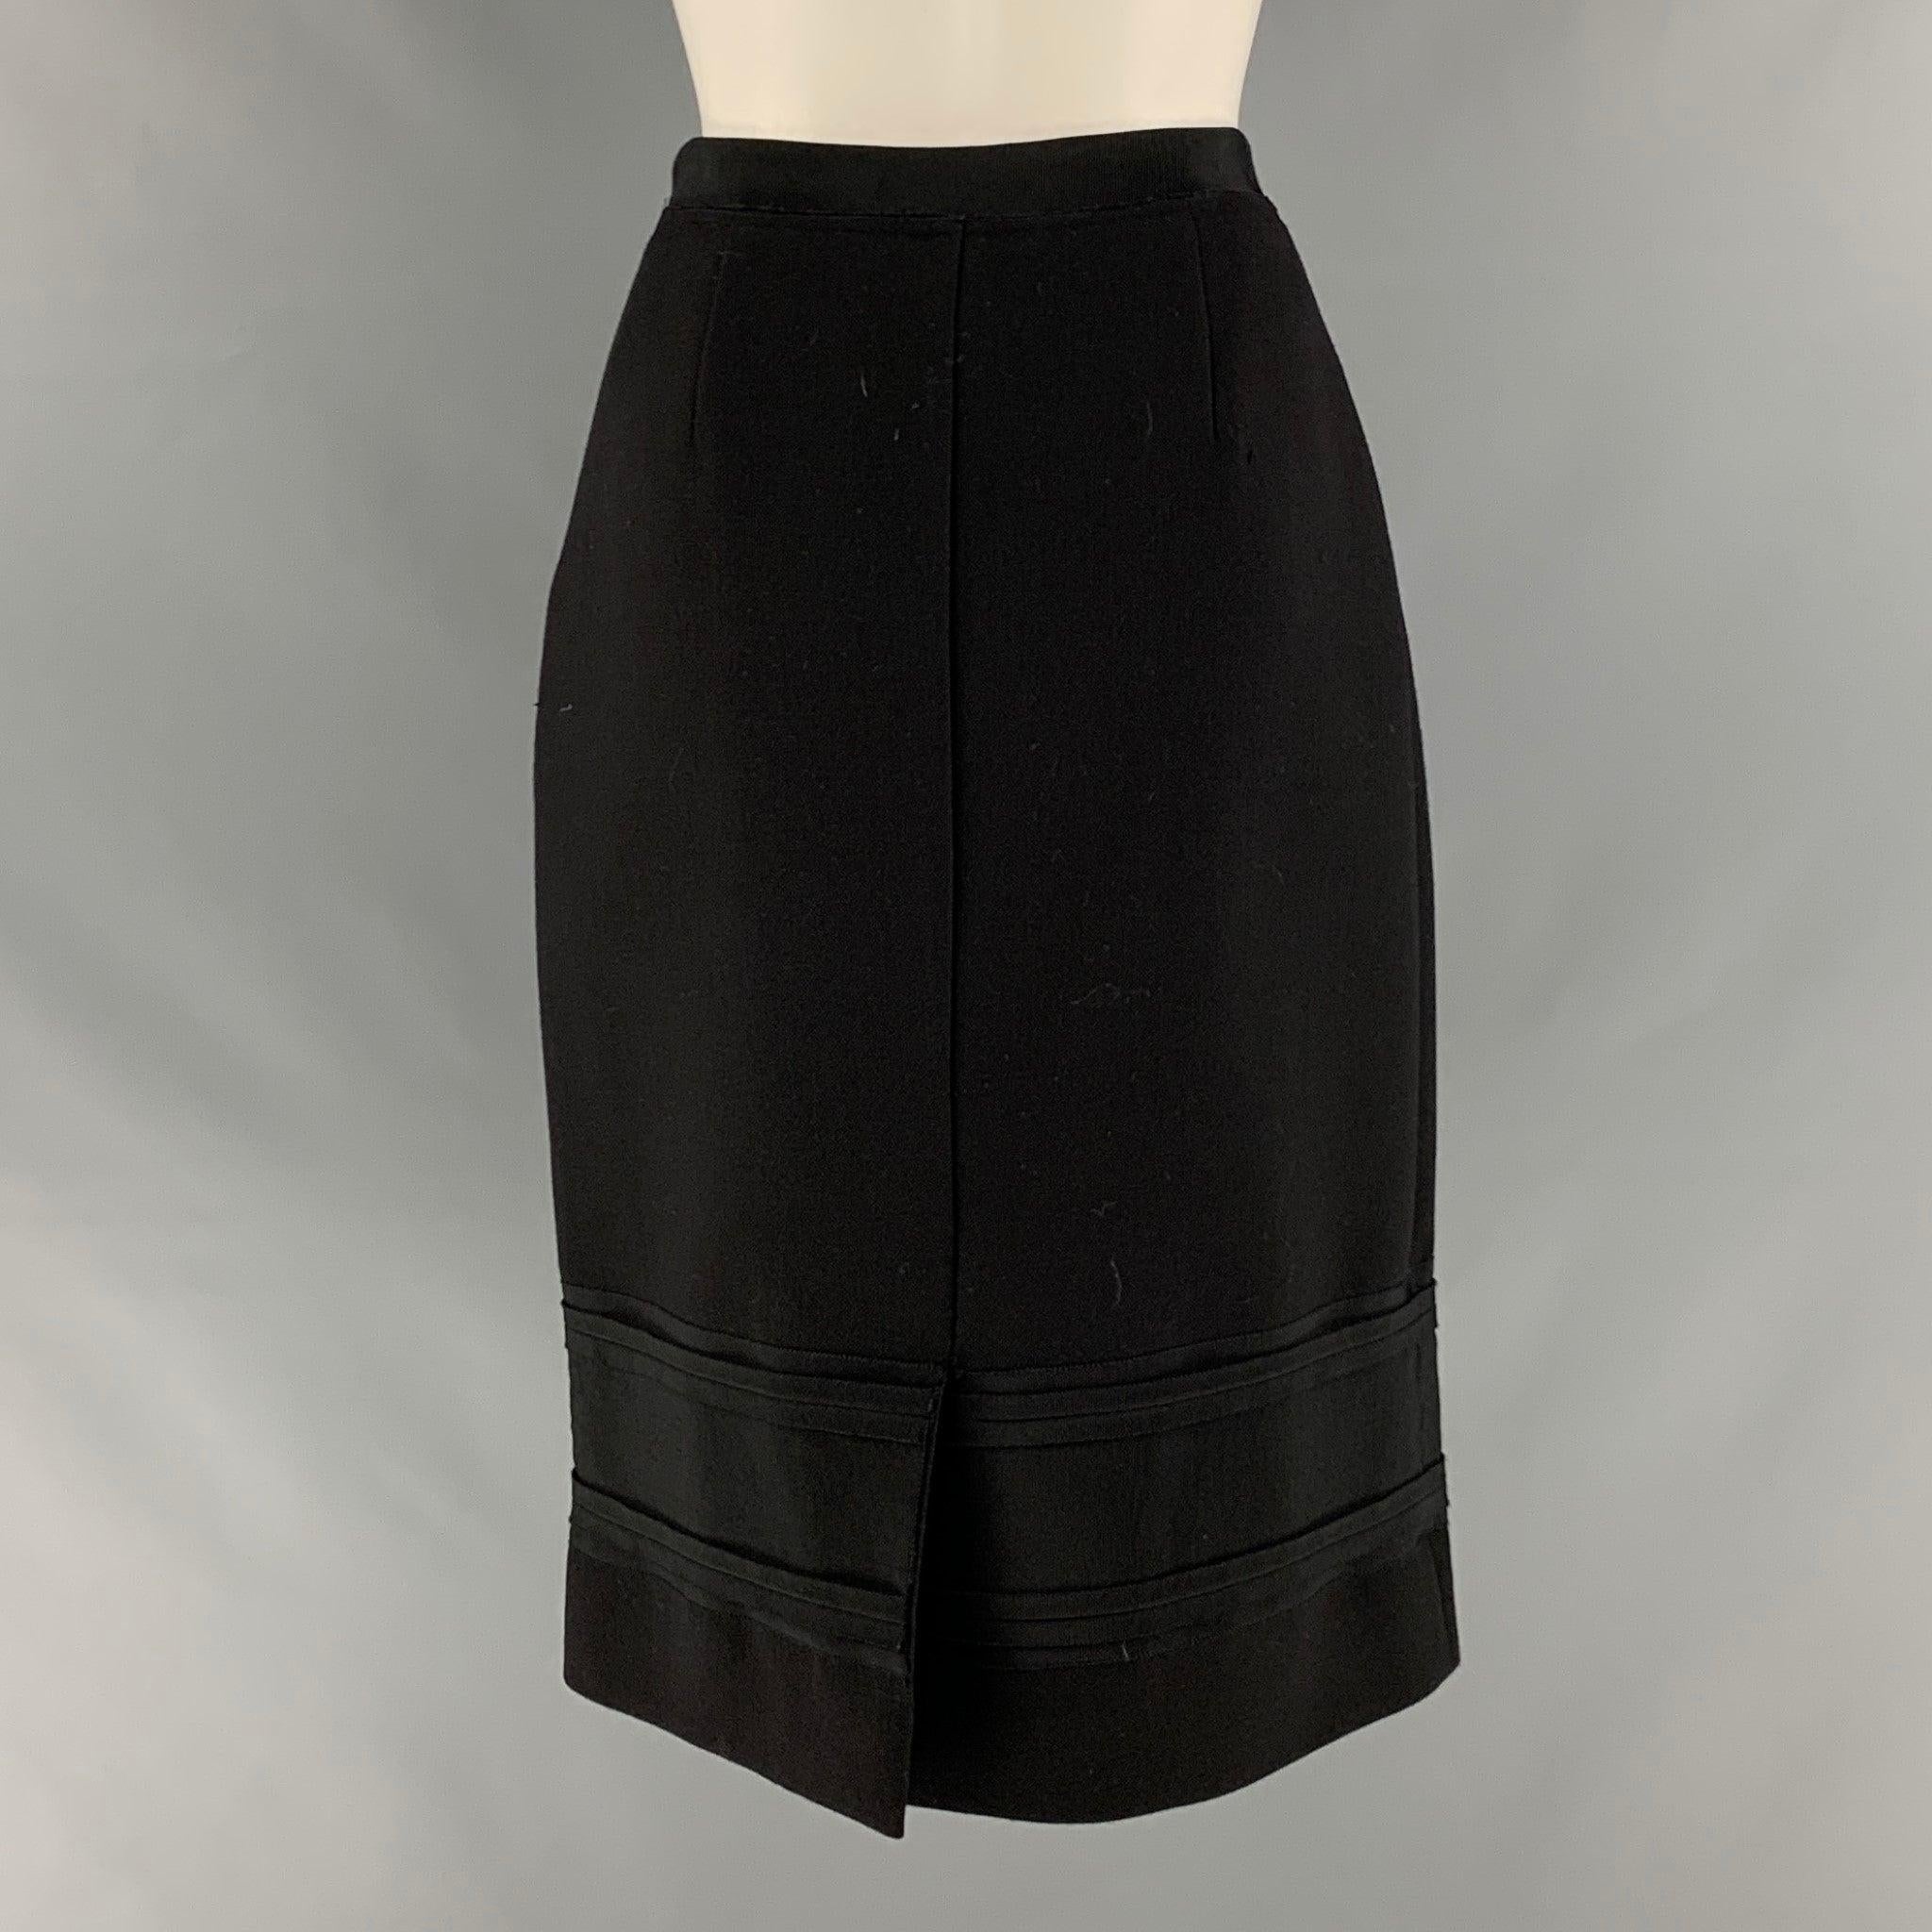 PRADA Size 6 Black Wool Pencil Knee-Length Skirt In Good Condition For Sale In San Francisco, CA